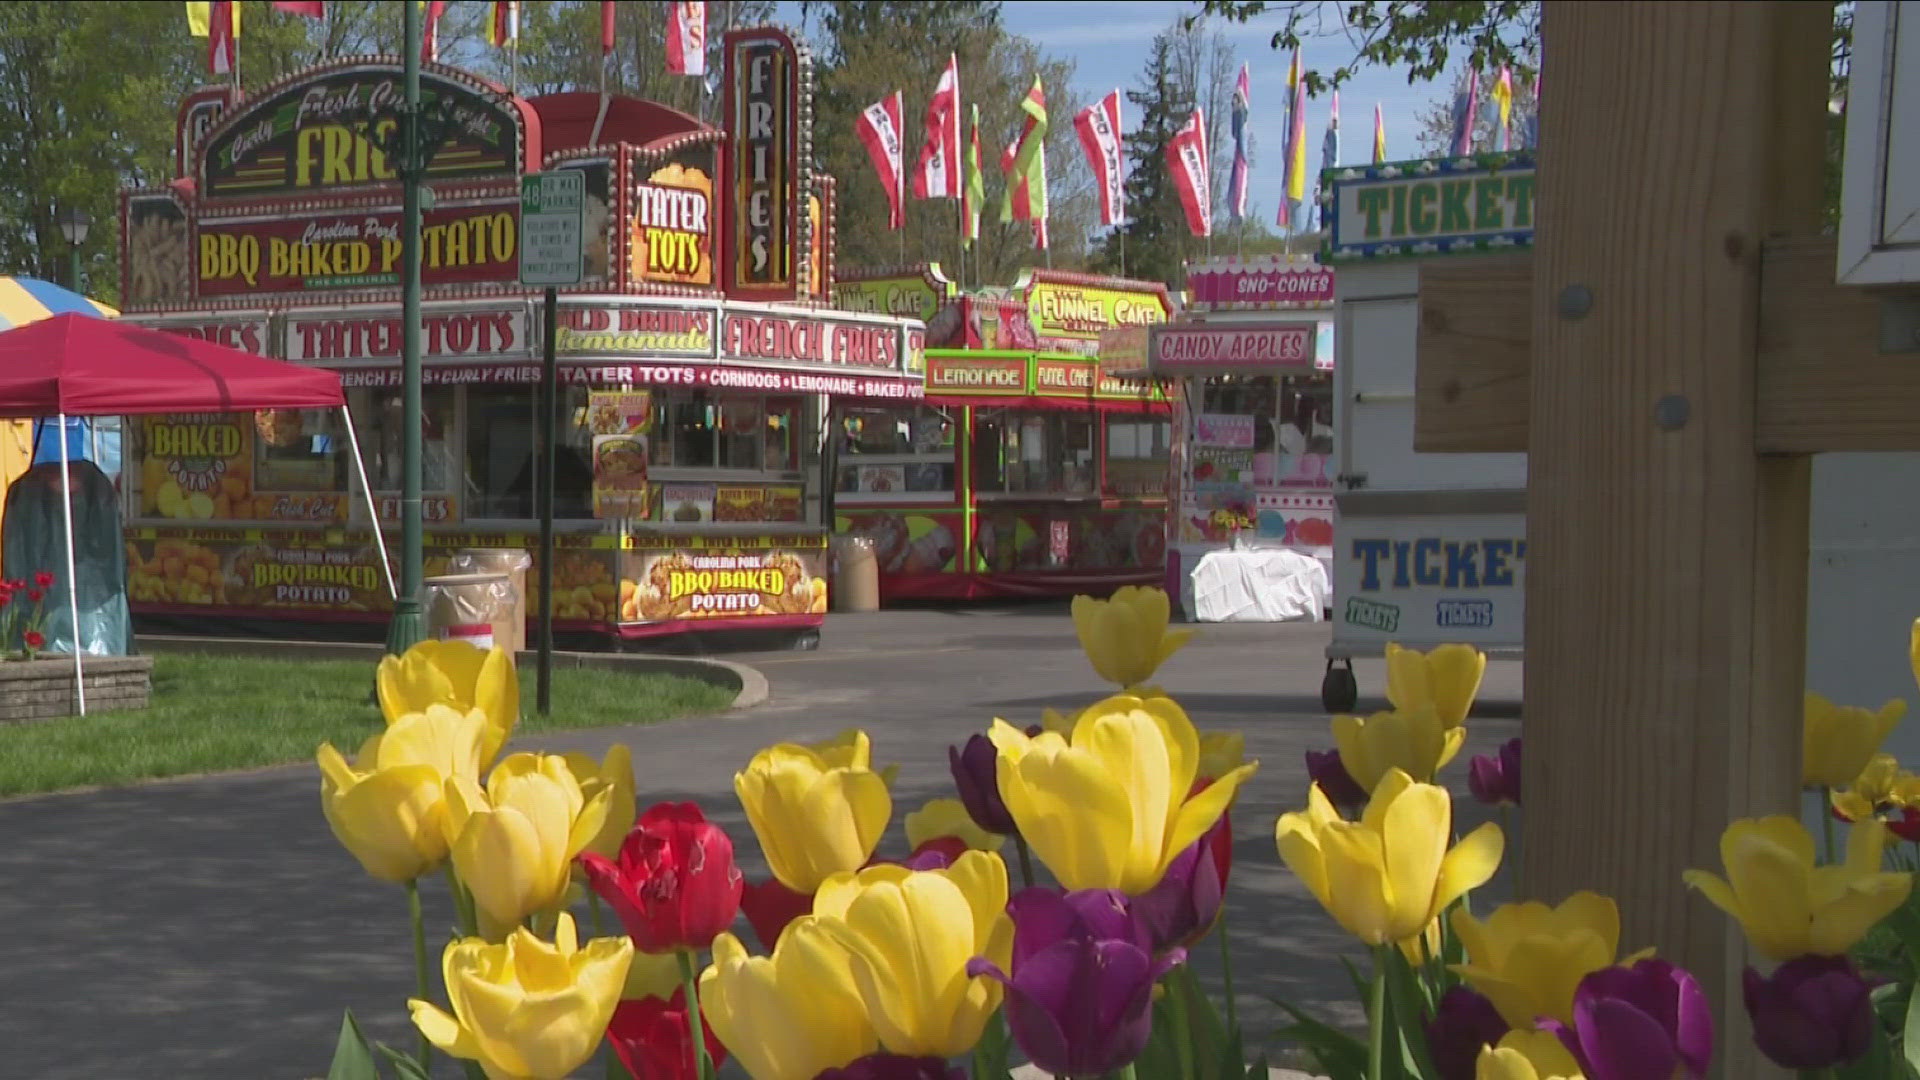 The 67th annual festival in Holland kicked off Friday with carnival rides, games, and a pageant.